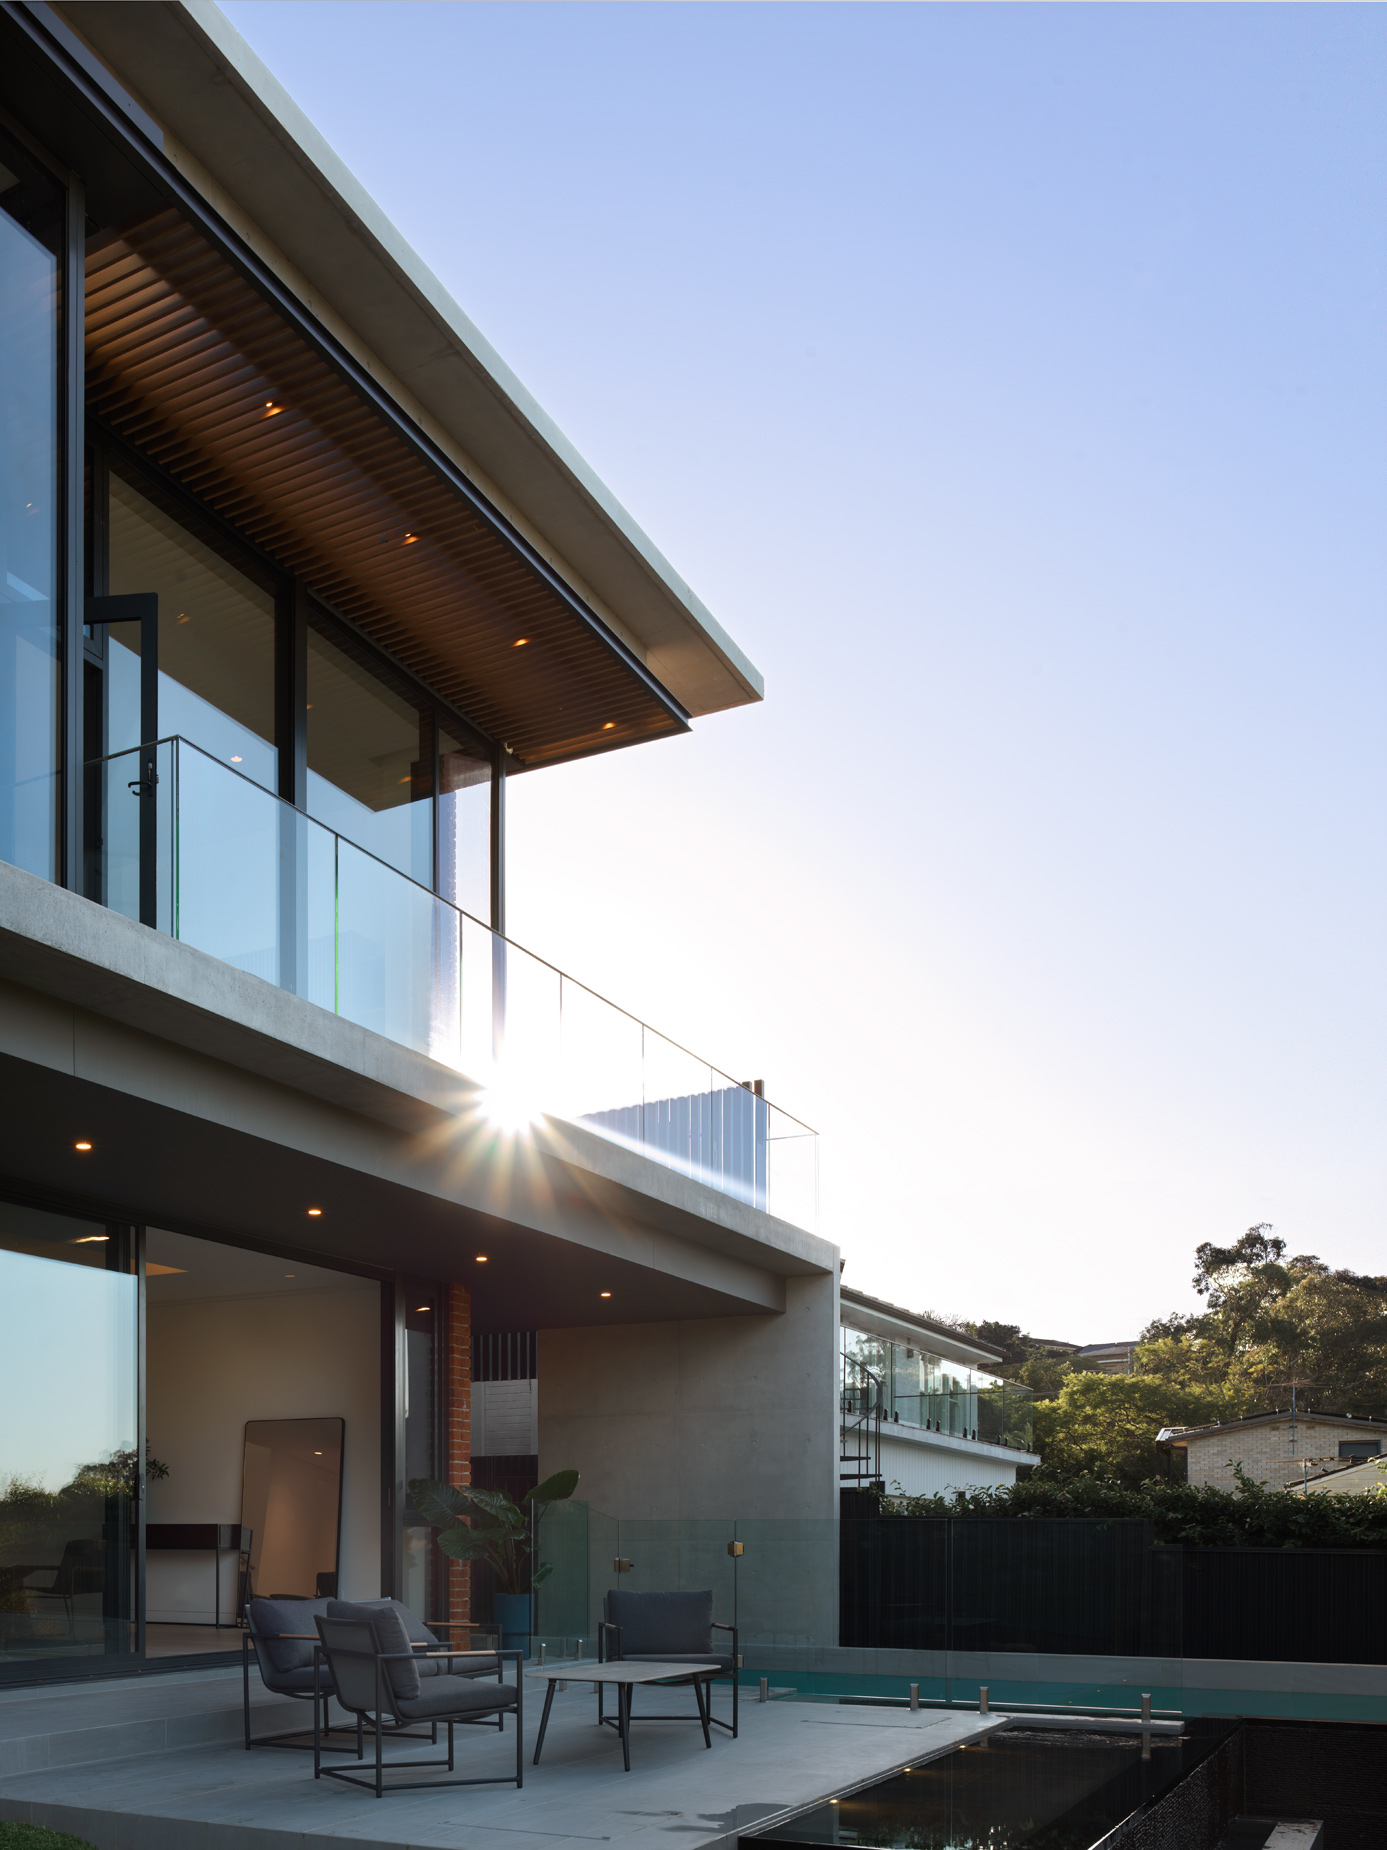 luke-butterly-2020-Cove-Cove-House-by-Dieppe-Design-Architecture-Sydney-NSW-1